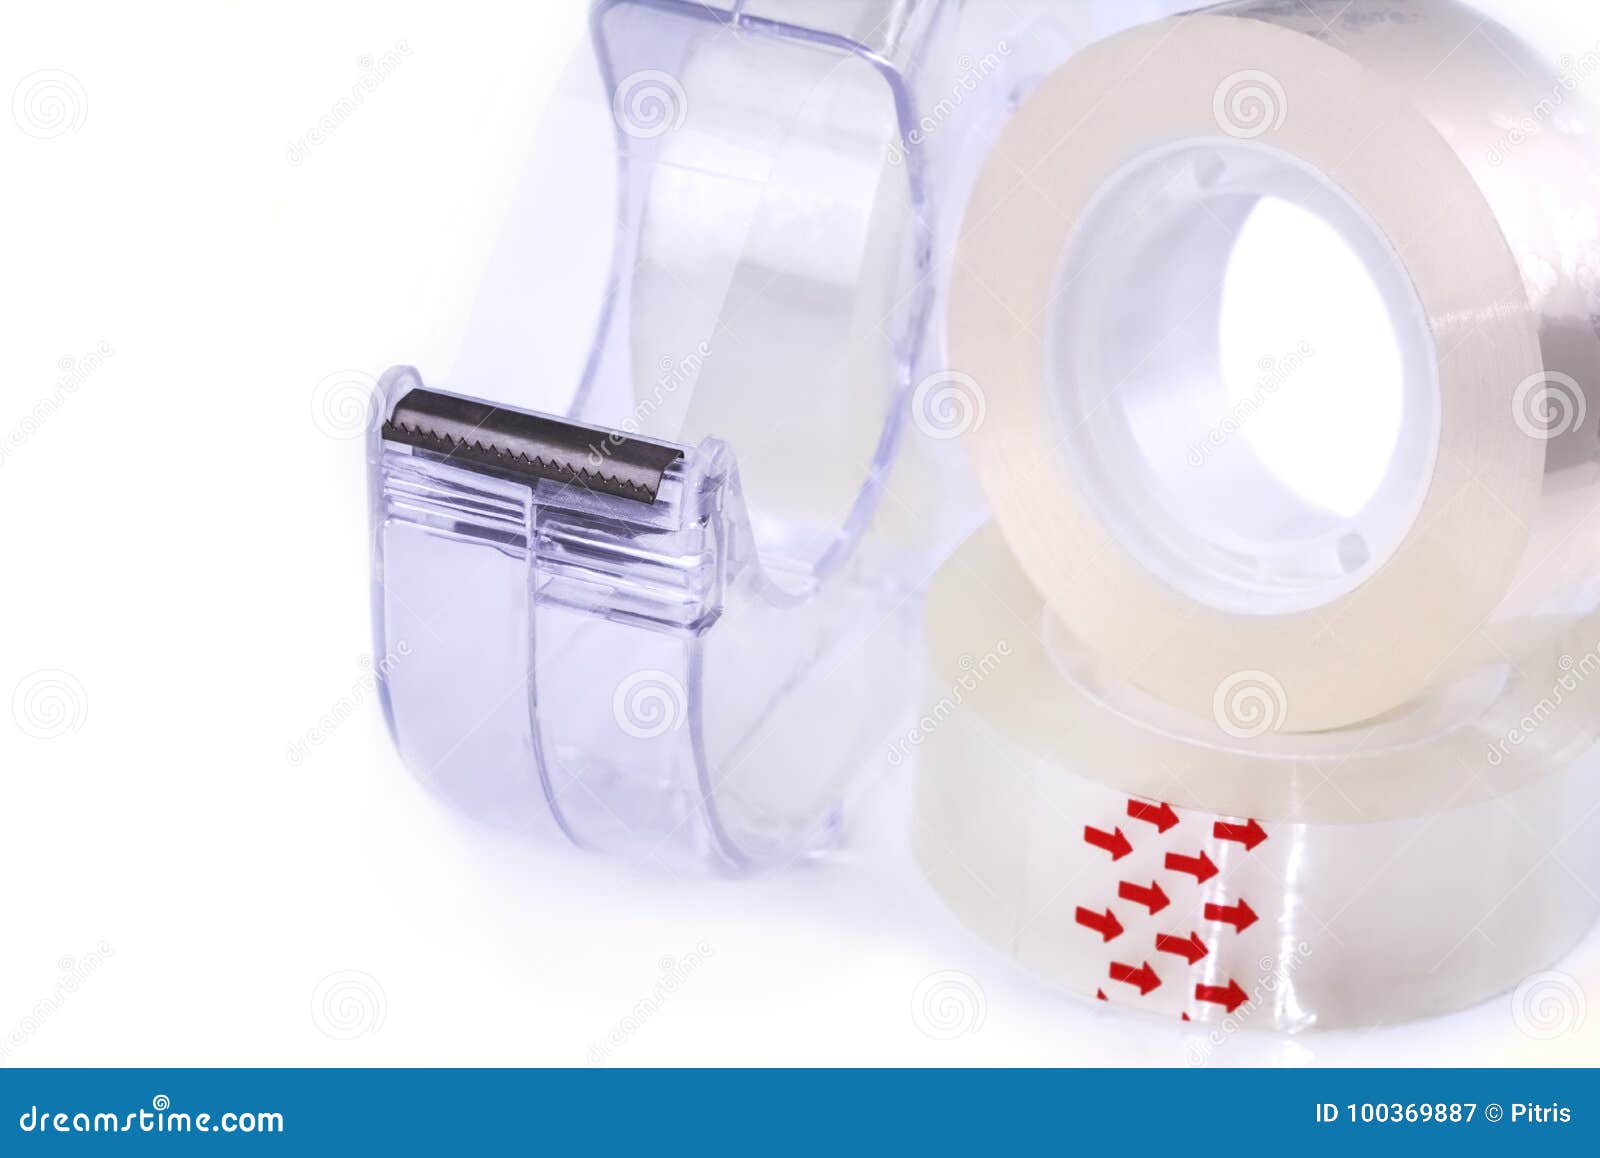 Roll Of Transparent Adhesive Tape Stock Image - Image of band, plastic